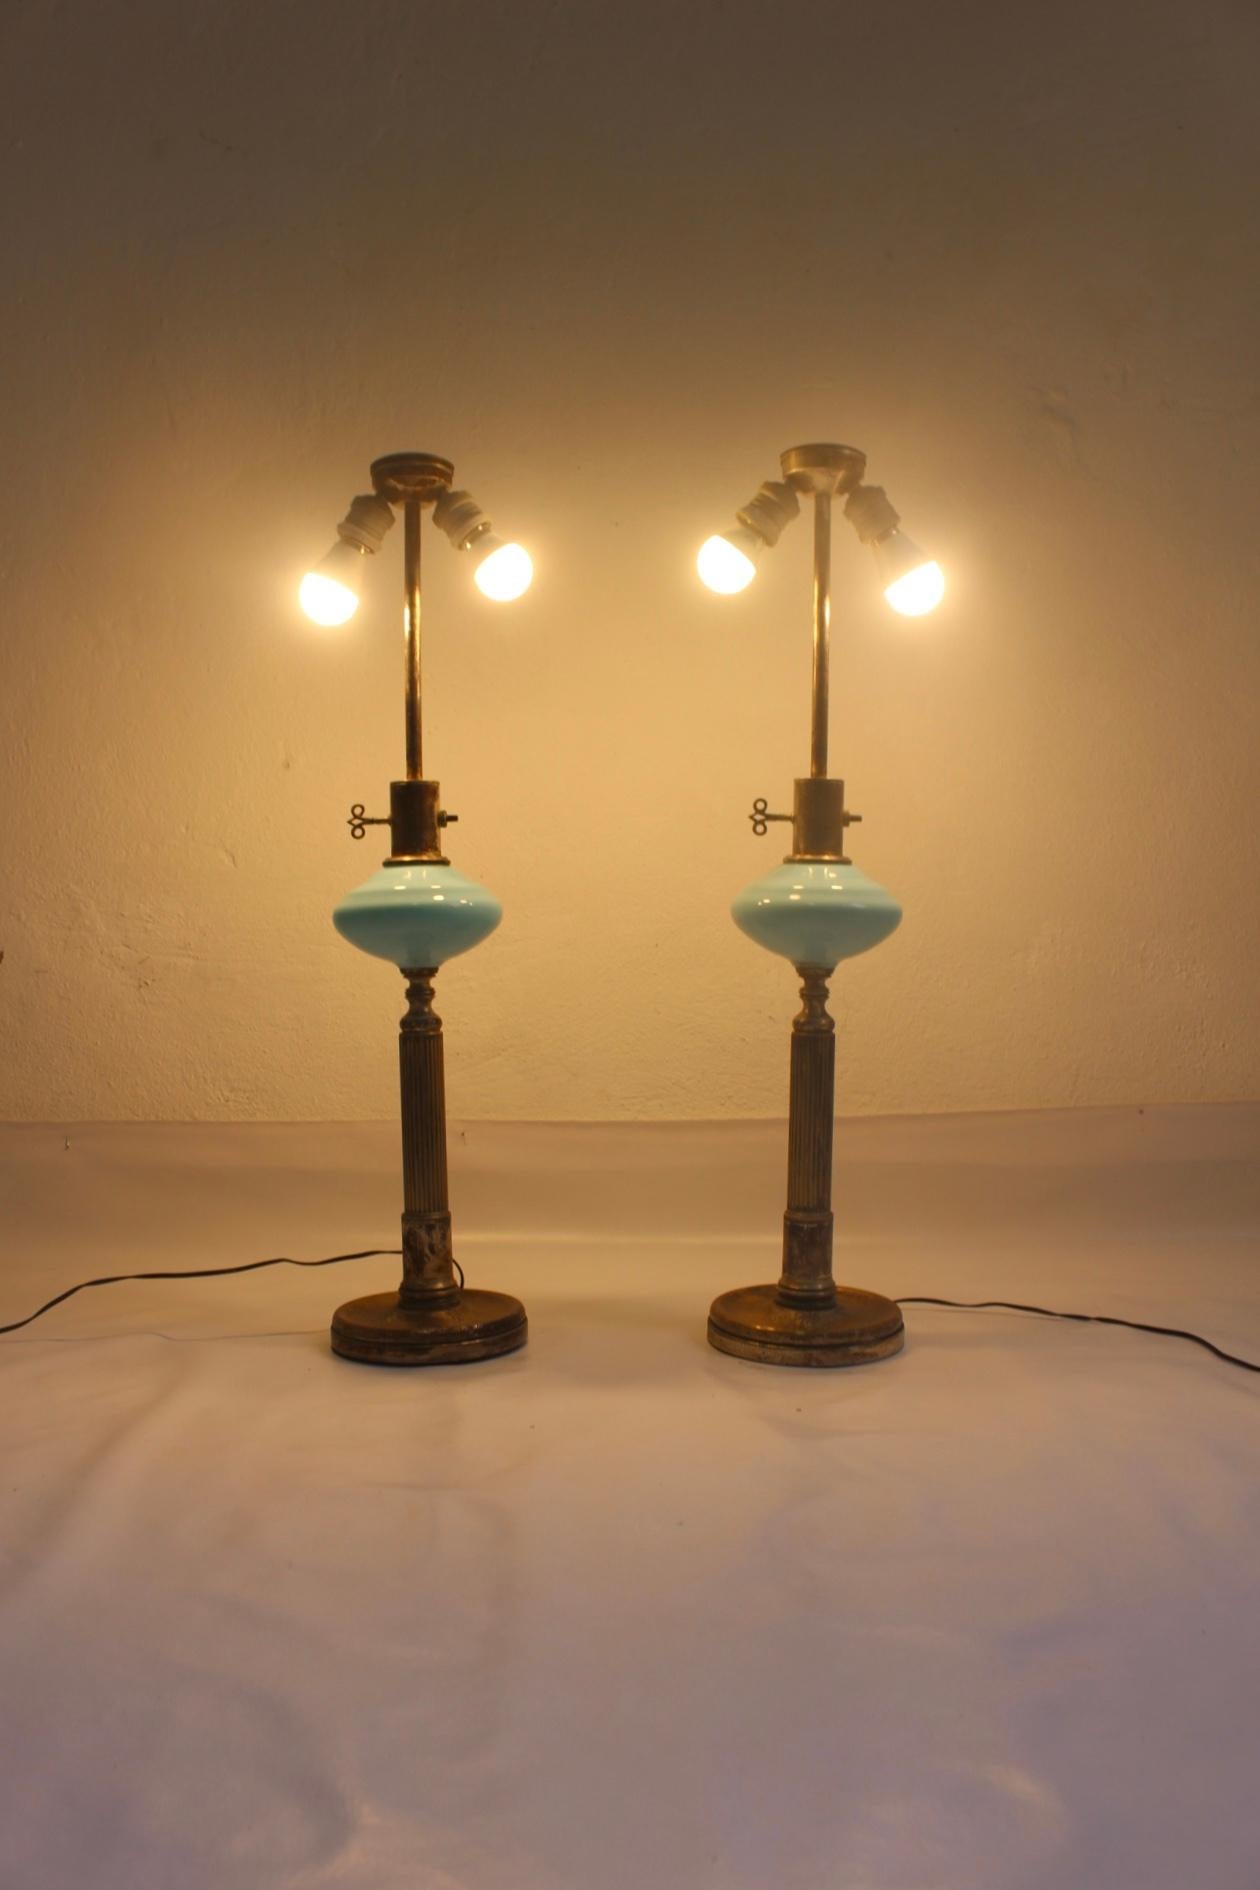 Set of two Art Deco blue opaline glass produced by Metalarte in the late 1930s or first 1940s. 
An early model from this Spanish lighting company, extremely rare to find.
Both pieces remaining in distressed condition but in perfect working